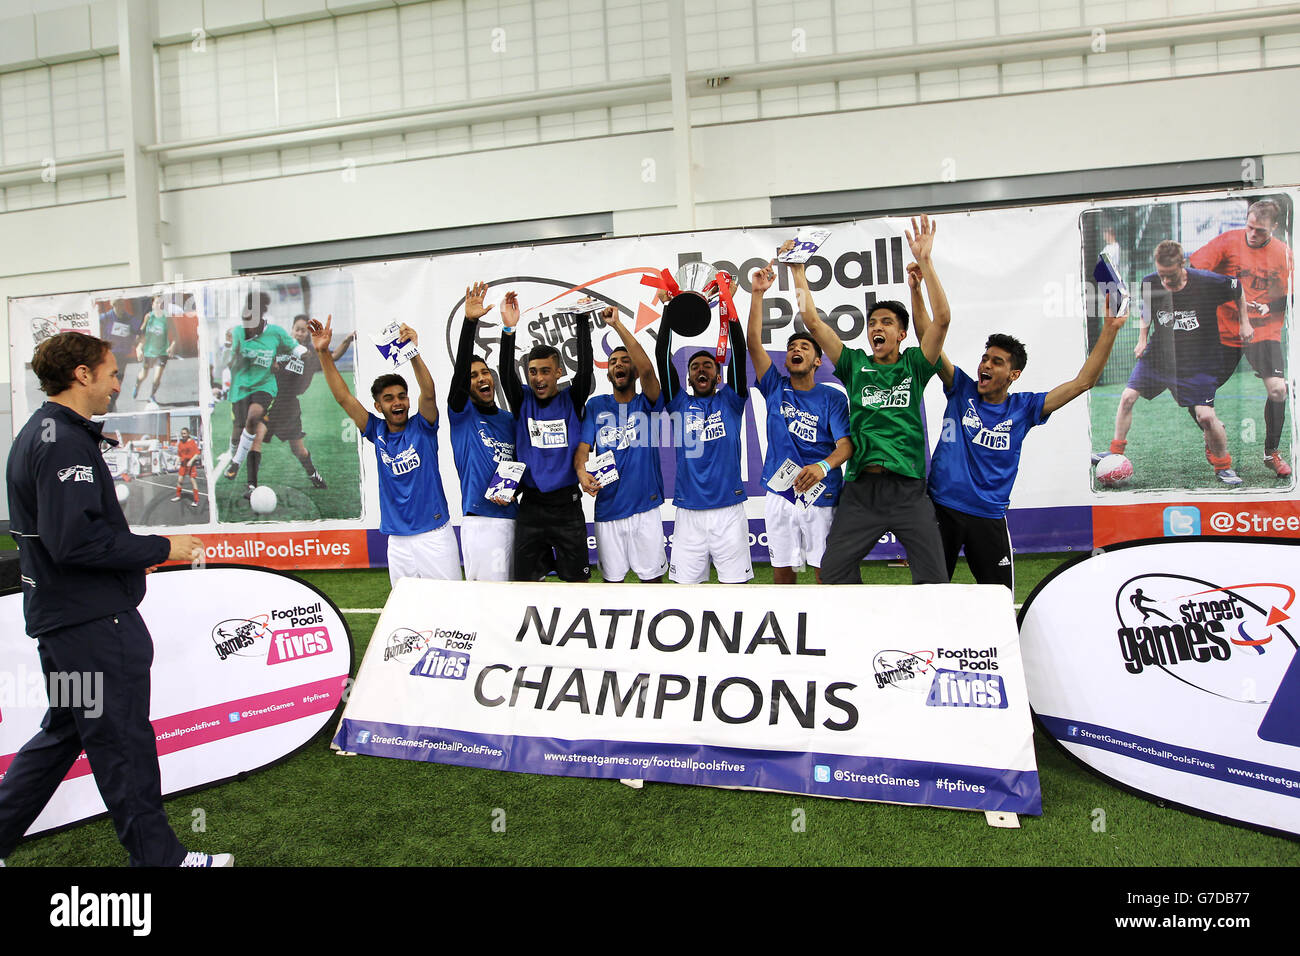 Gareth Southgate presents the winning team with their trophy at the StreetGames Football Pools Fives event at St George's Park, Burton Stock Photo